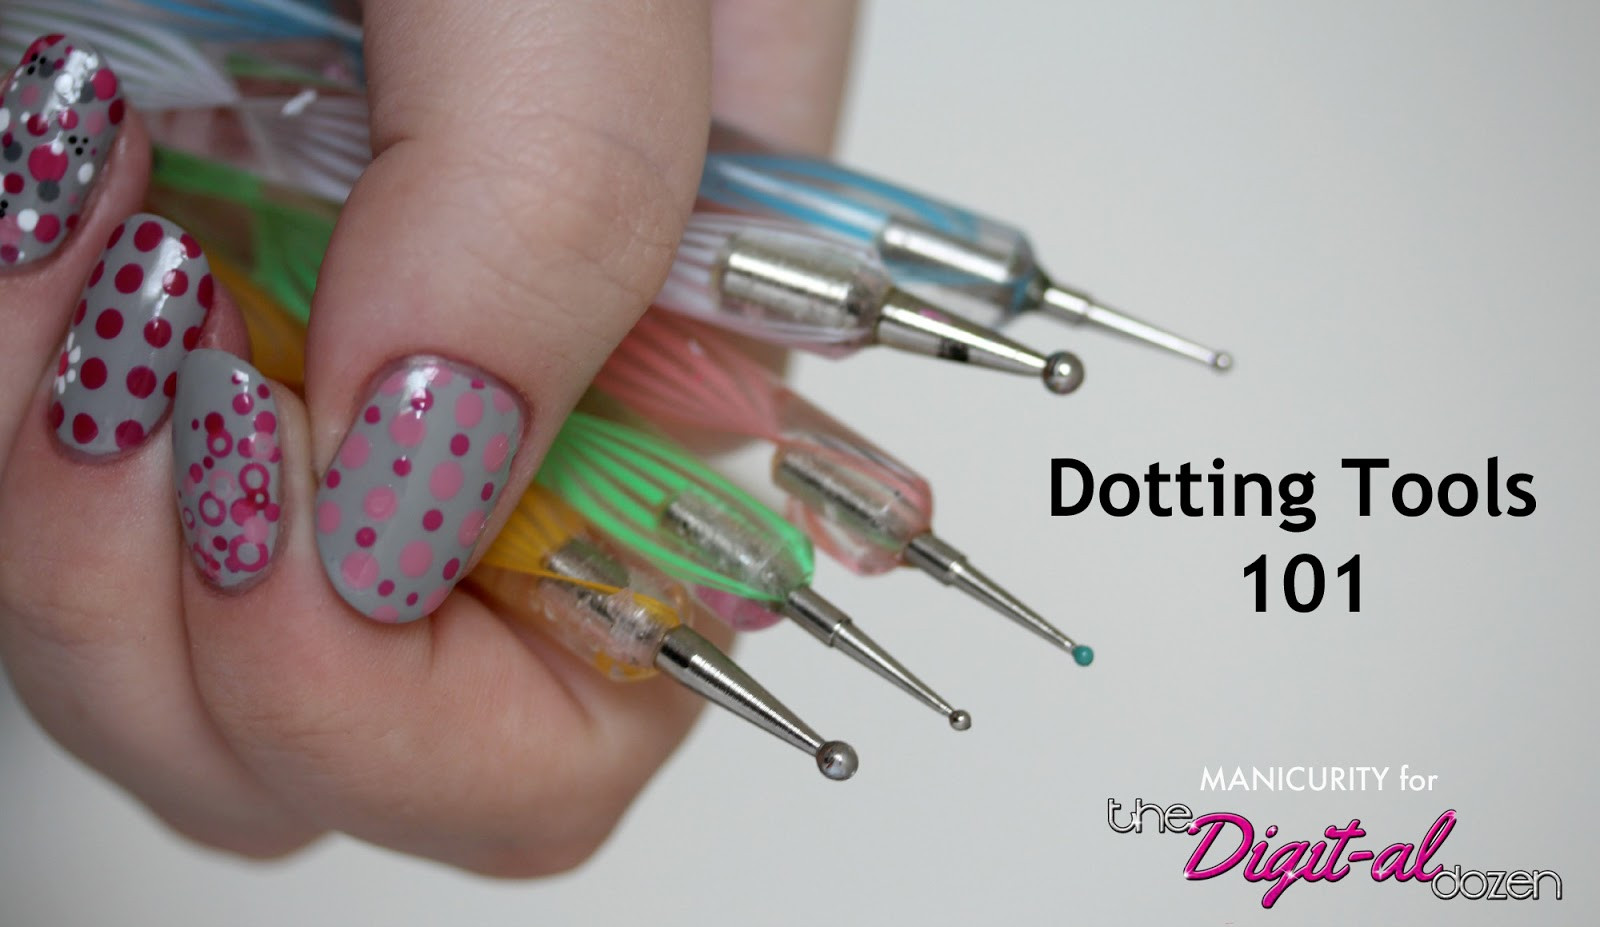 Nail Art Tools And Equipment
 Dotting Tools 101 The Definitive Guide to Getting Dotty